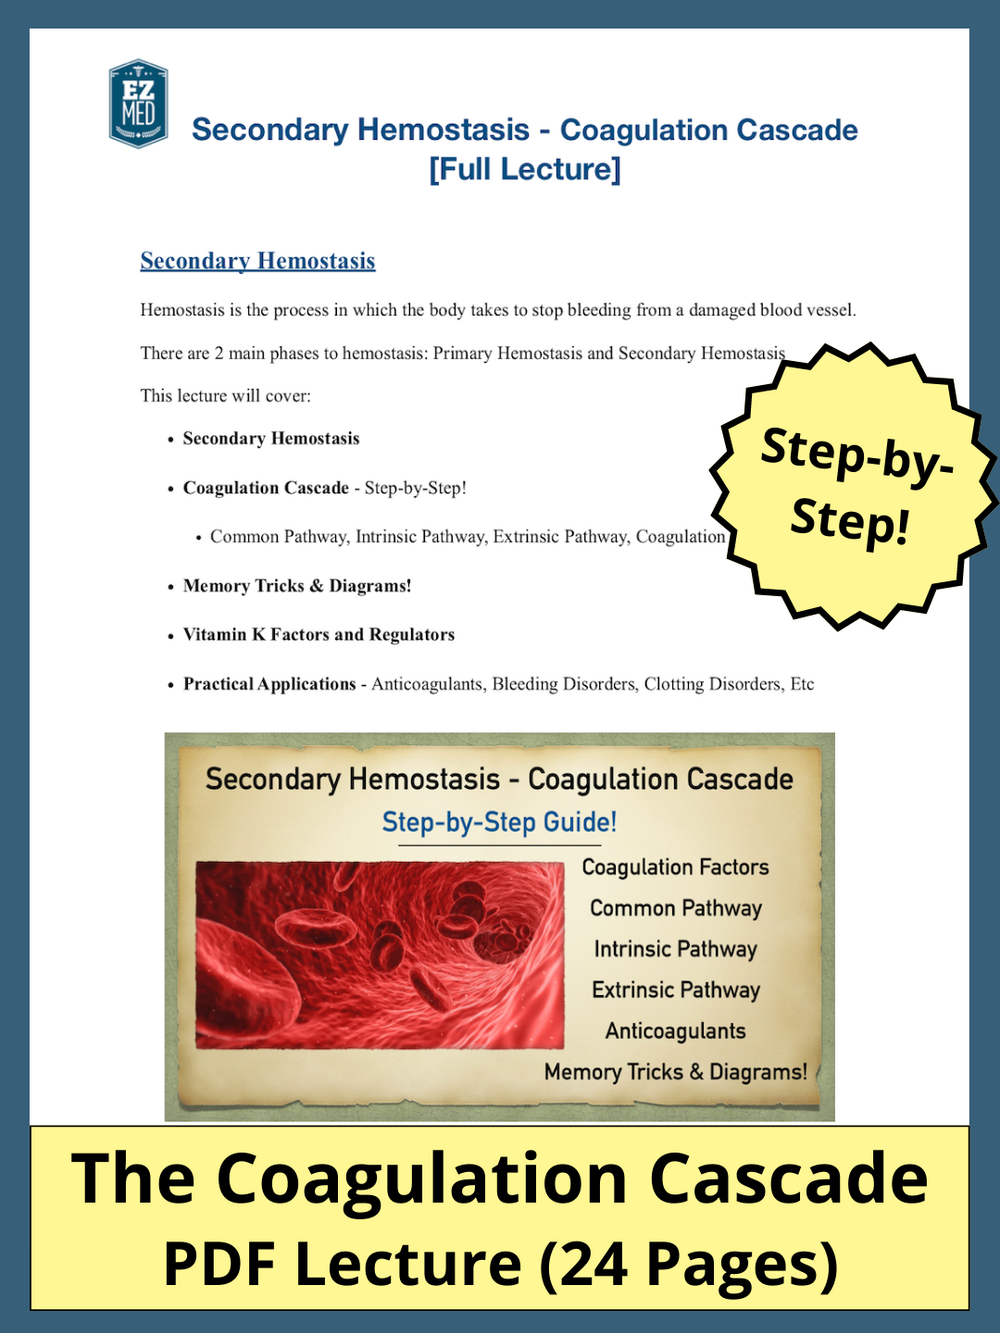 Secondary Hemostasis Definition and Coagulation Cascade Pathway Steps with  Ppt Diagram of Factors — EZmed